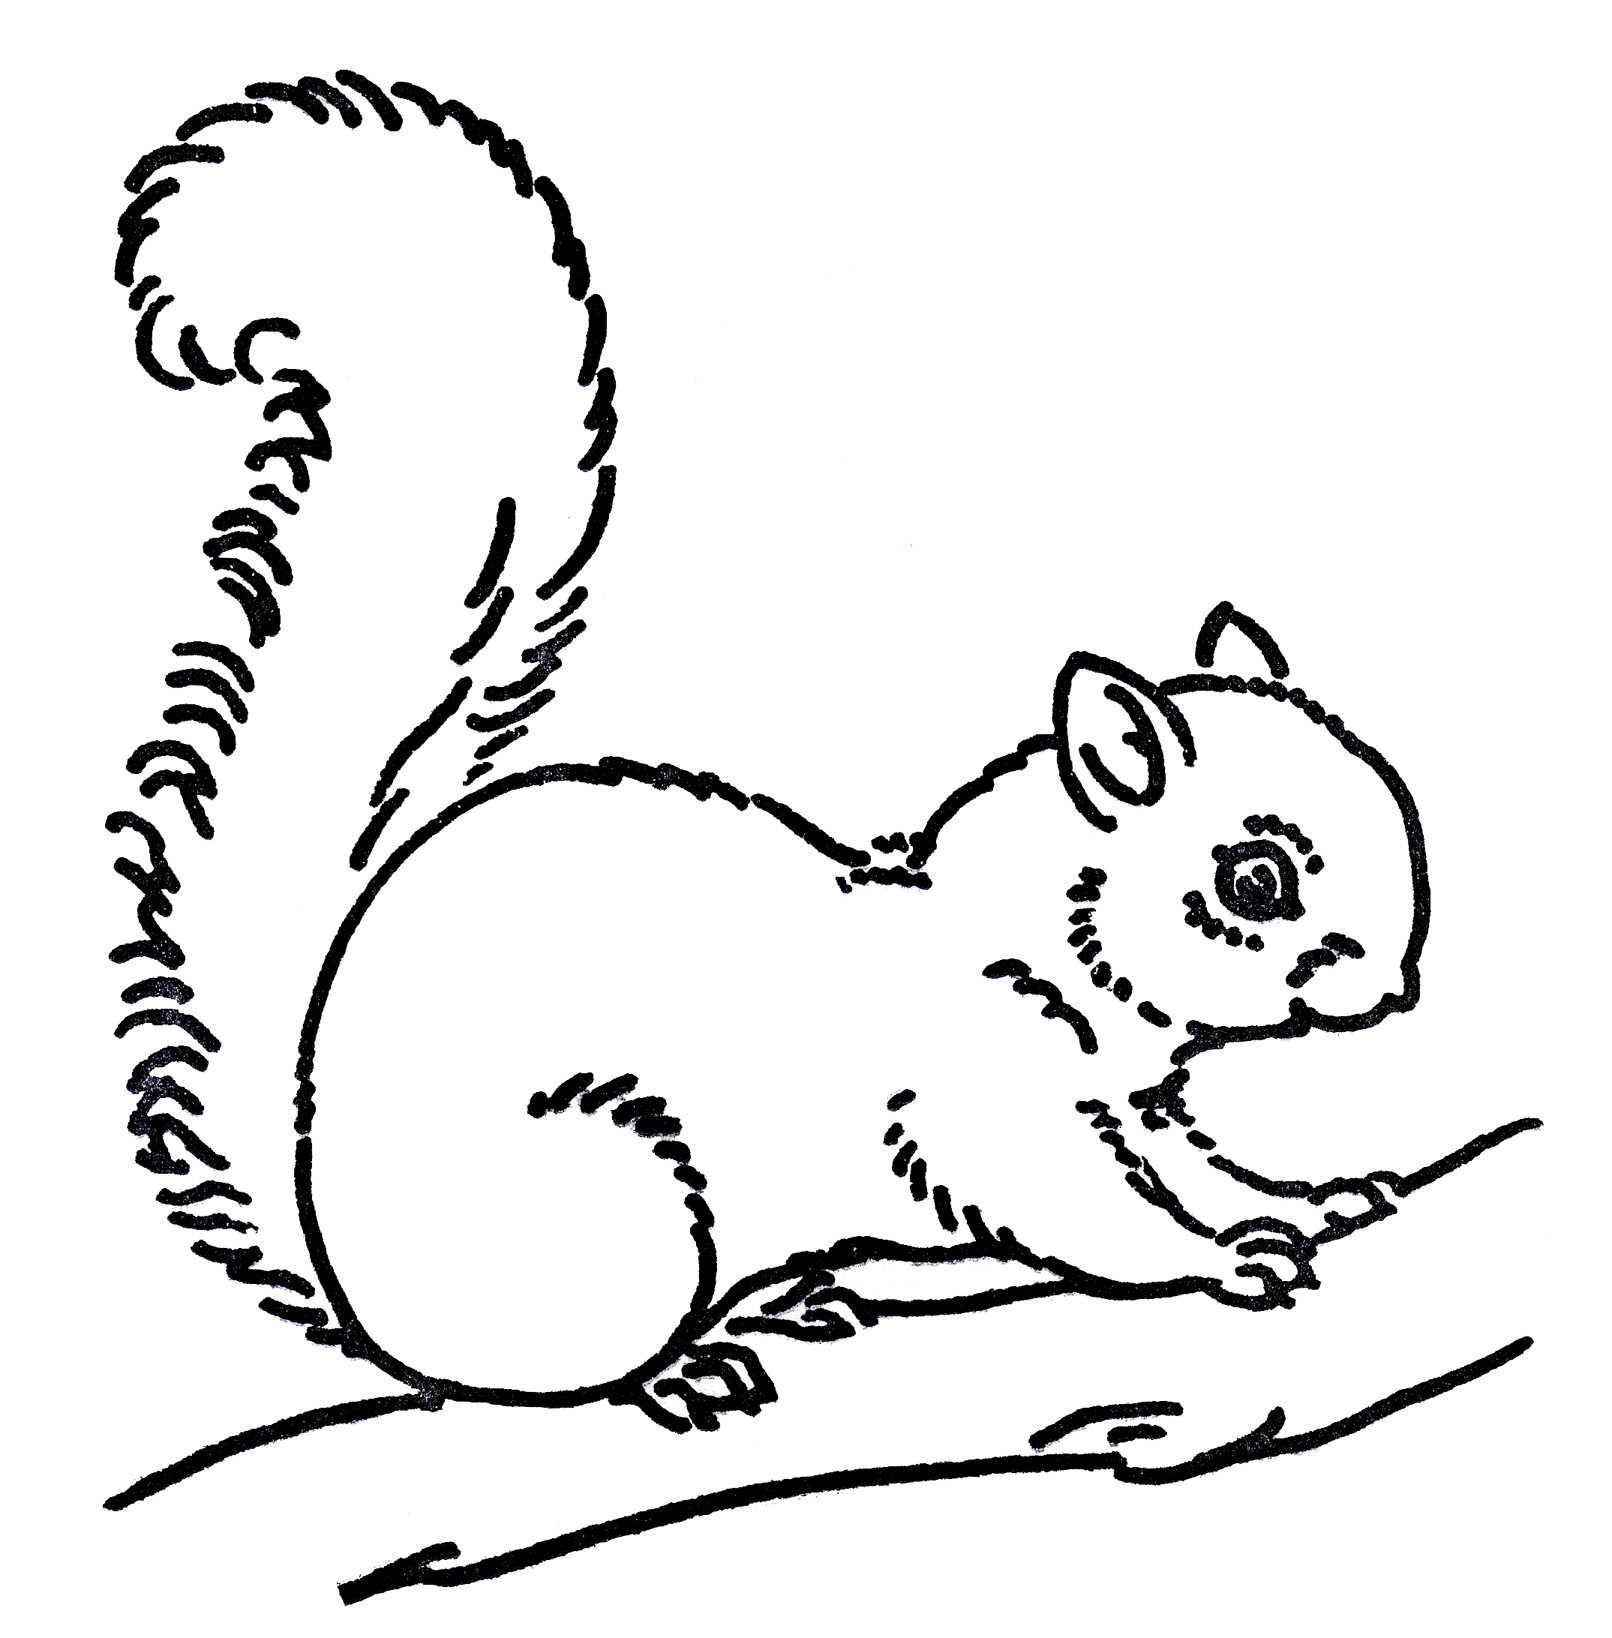 15  Happy Squirrel Line Art   This One Is A Black Line Drawing Of A